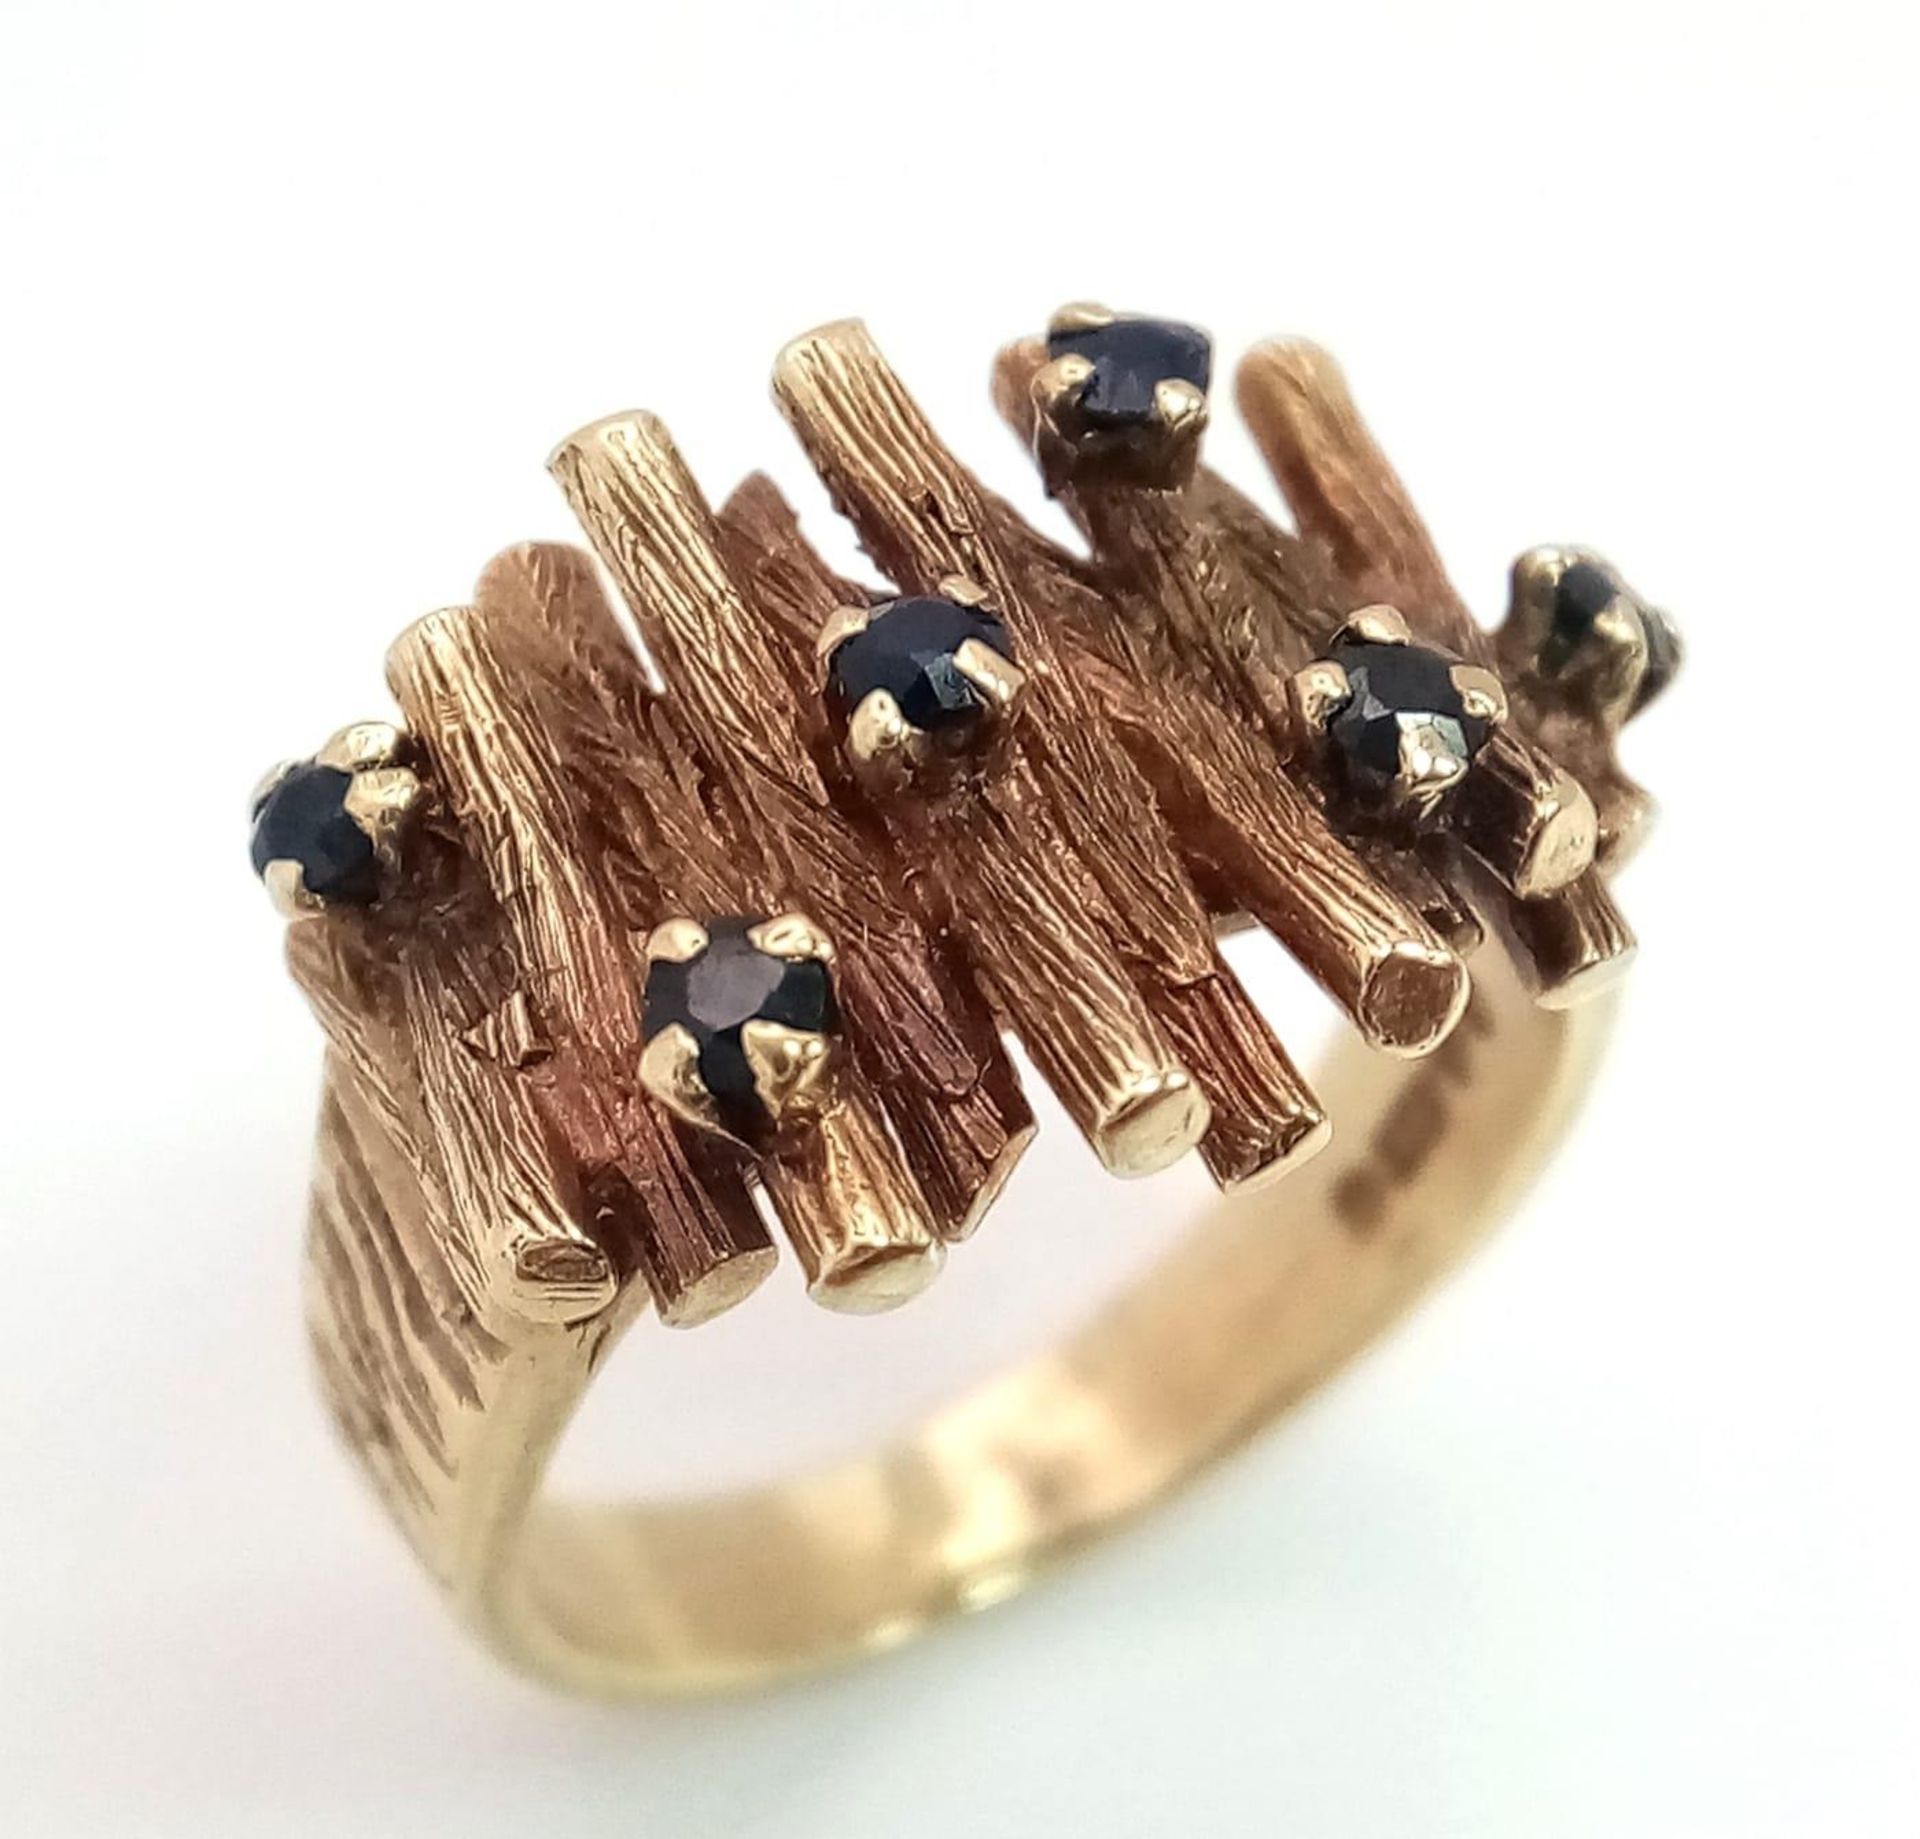 A 9K Yellow Gold and Sapphire Tree Branch Ring. Be at one with nature with this unique foliage